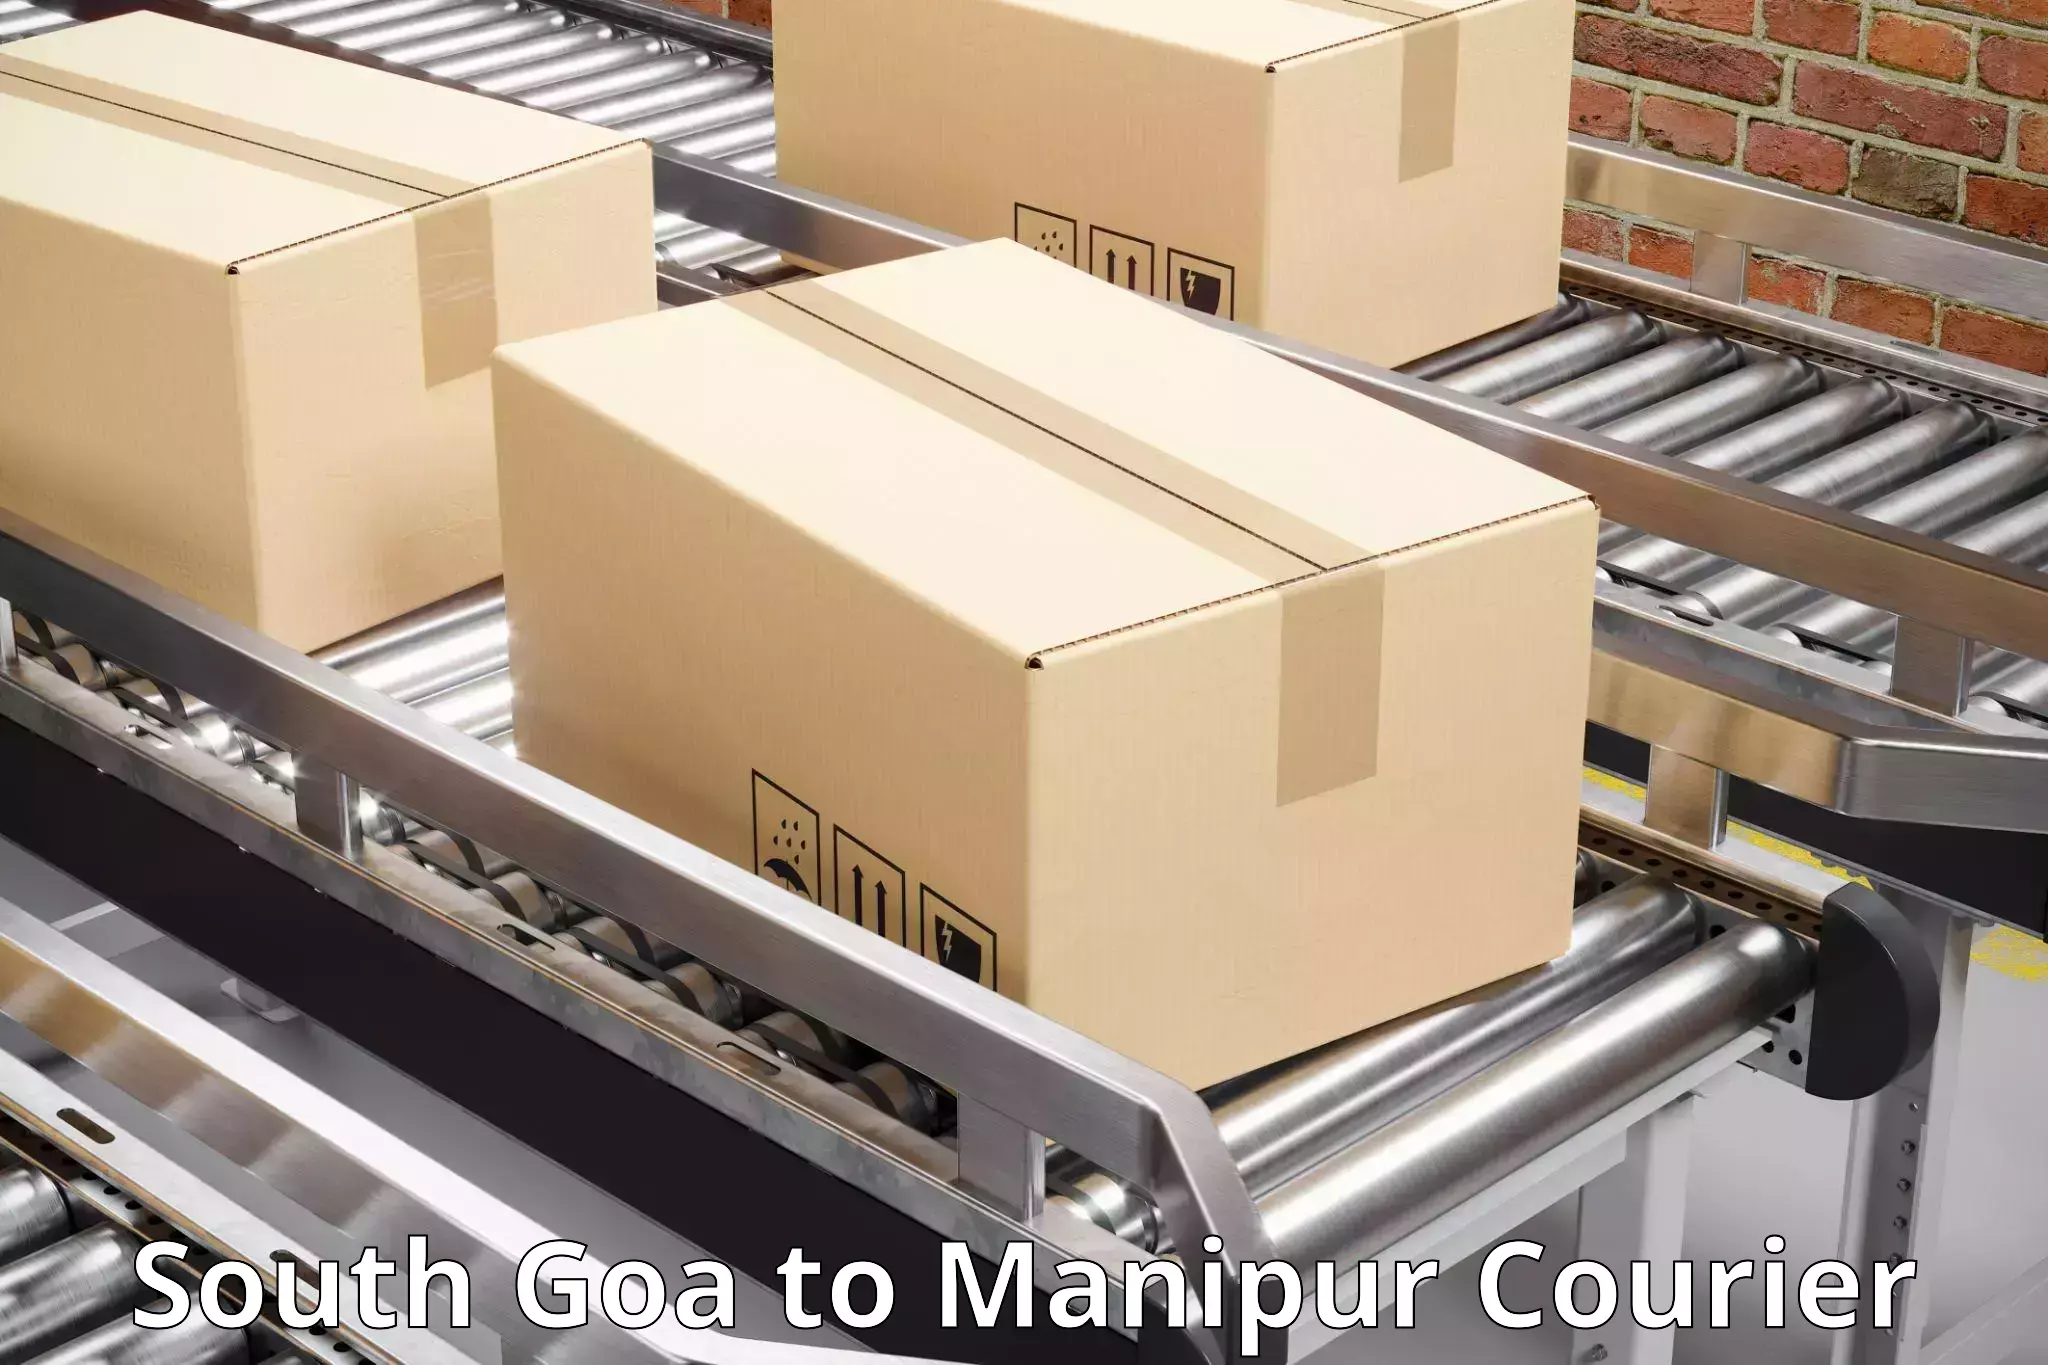 24-hour courier service South Goa to Imphal